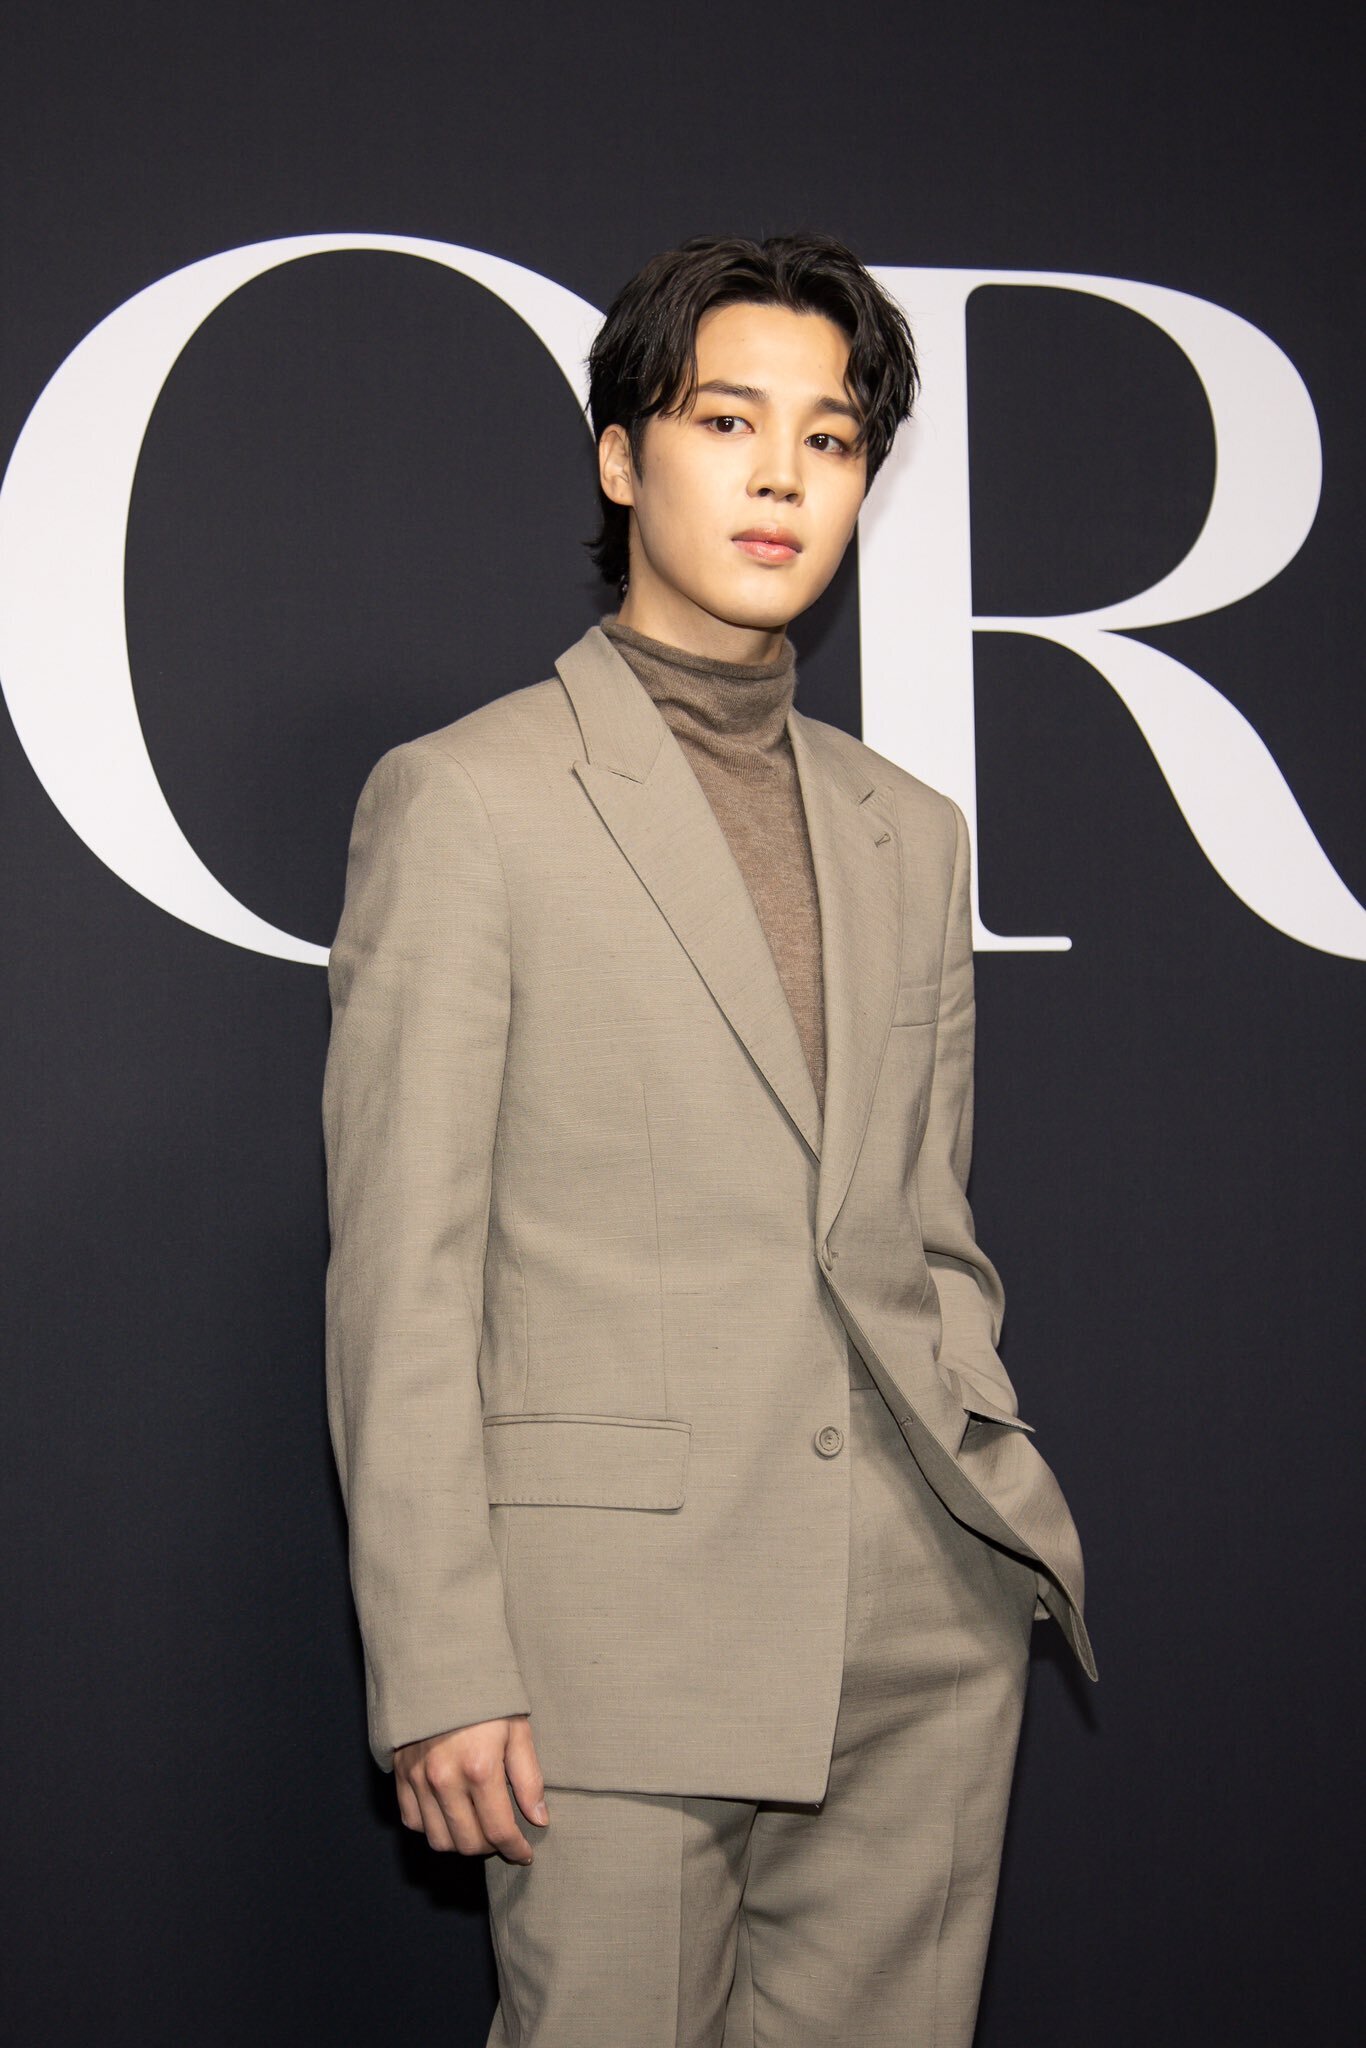 BTS's Jimin Sharply Suits Up for Dior's 2023 Menswear PFW Show